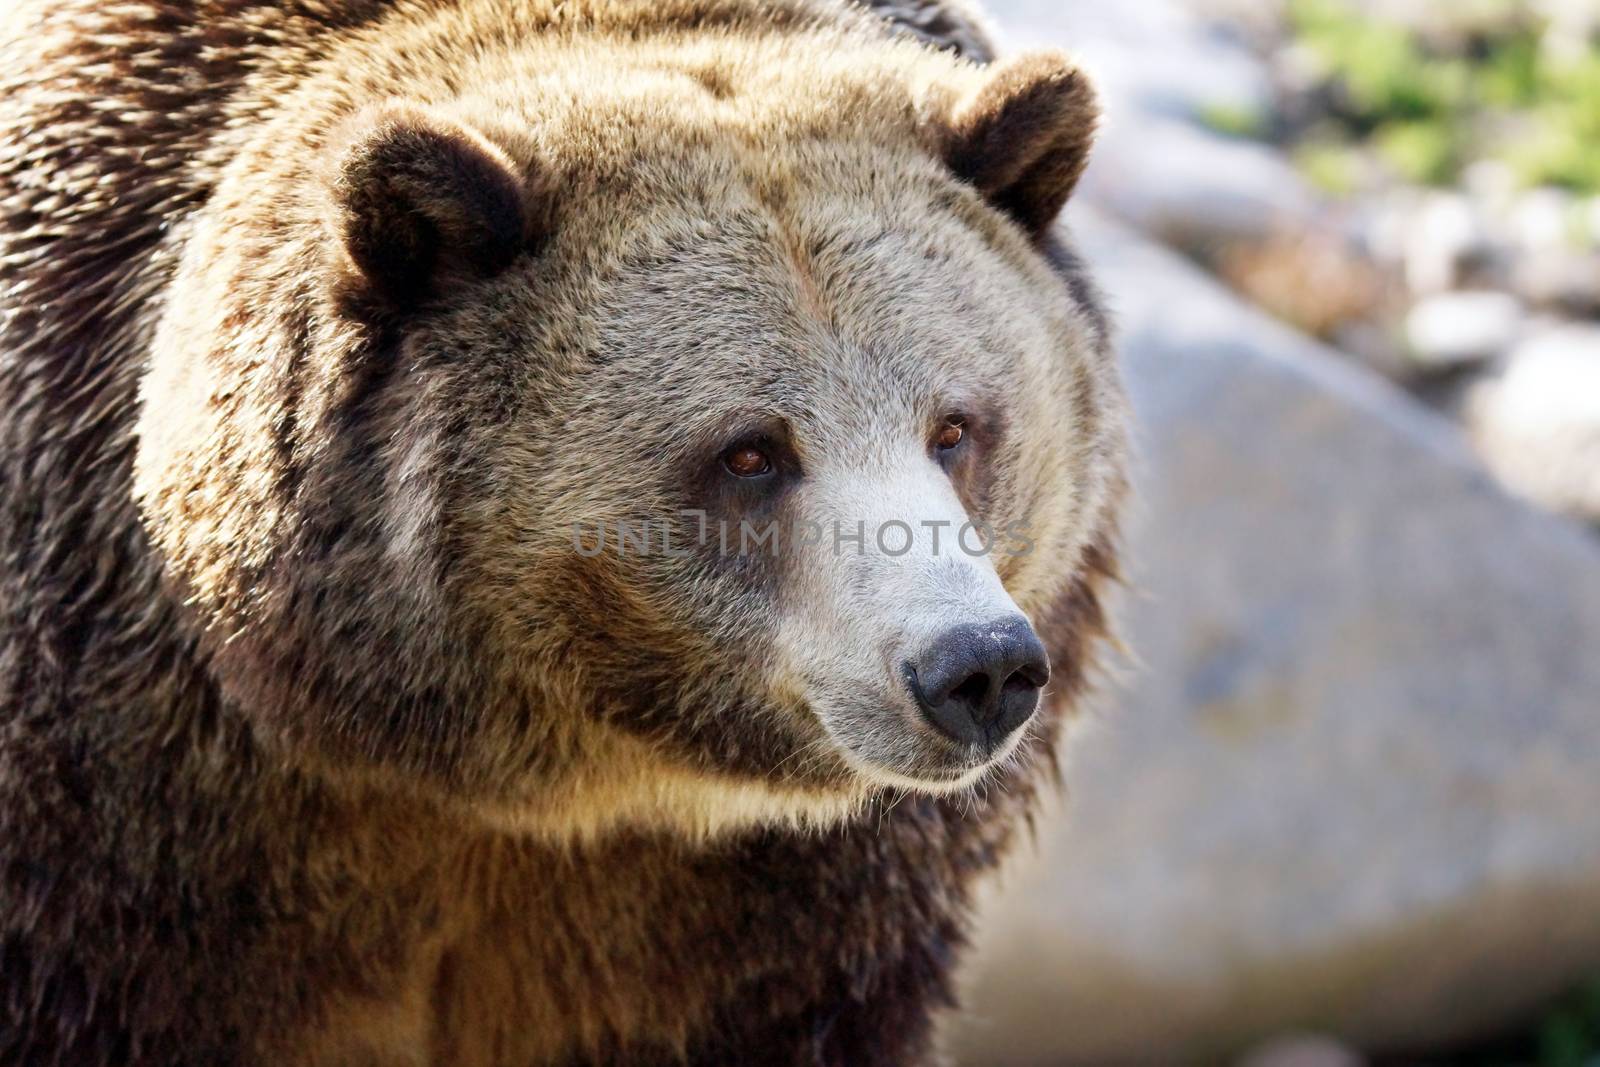 Big grizzly portrait by Mirage3